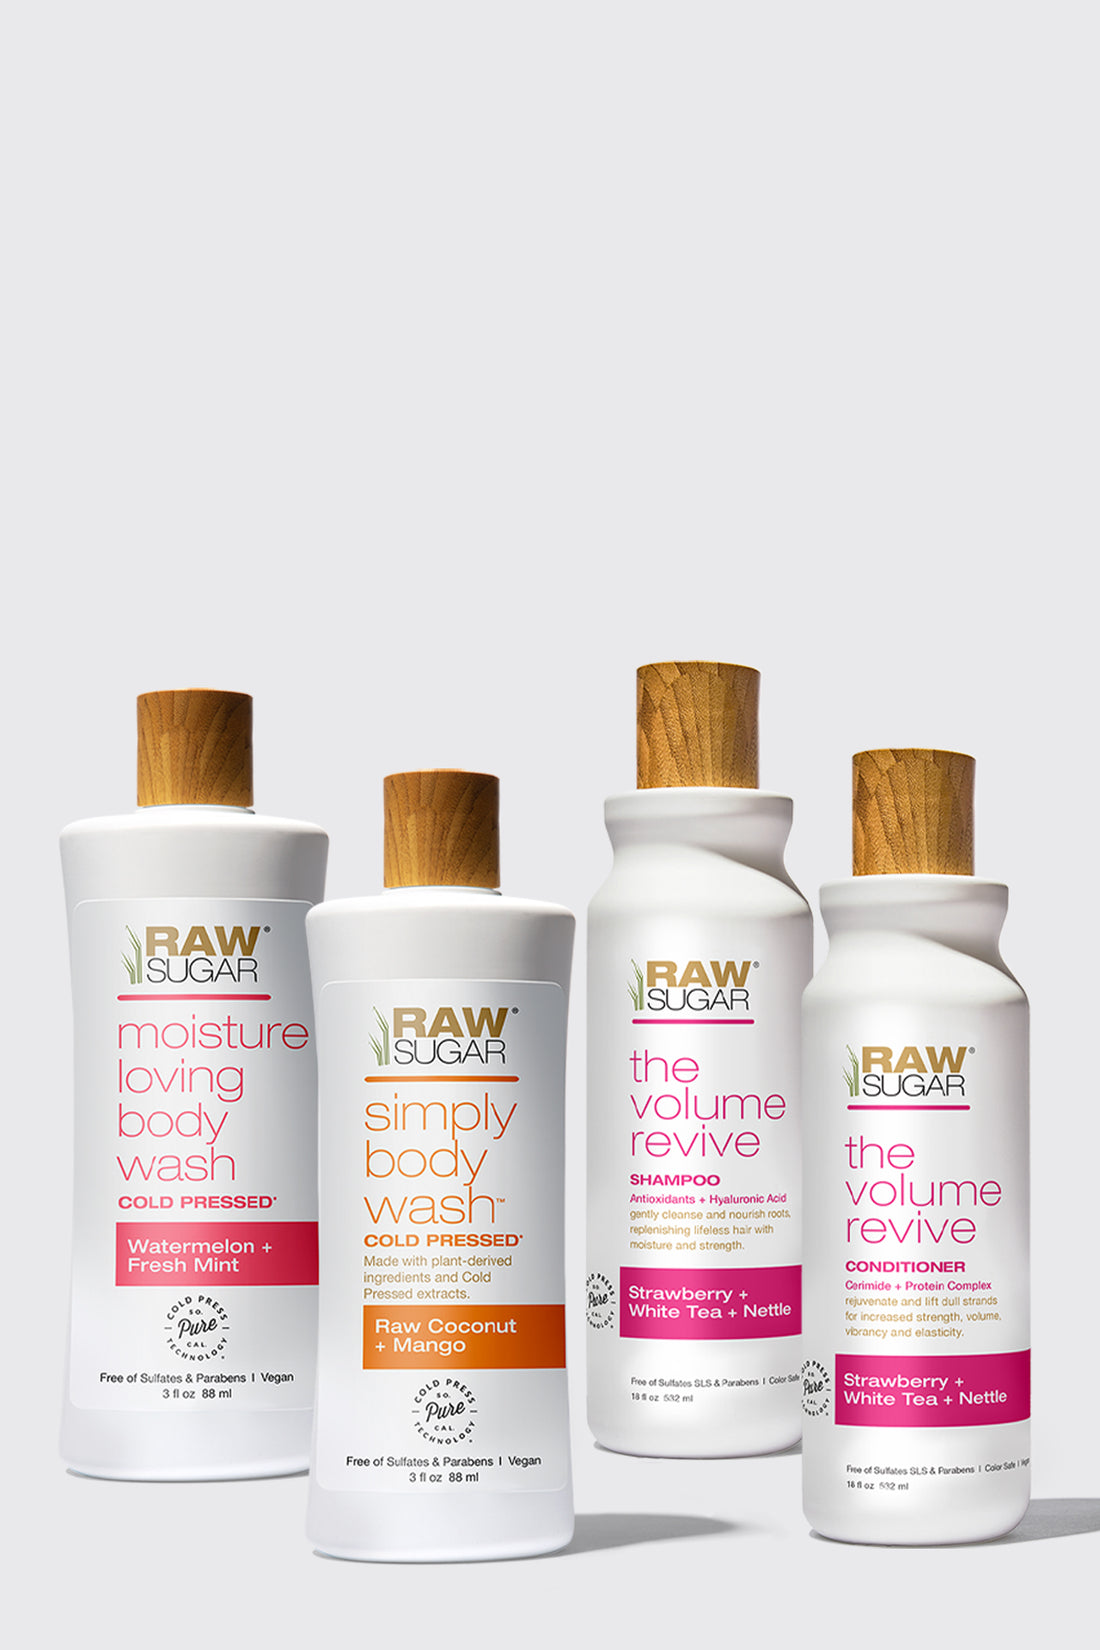 components of raw joy gift box body wash and volume revive shampoo ad conditioner